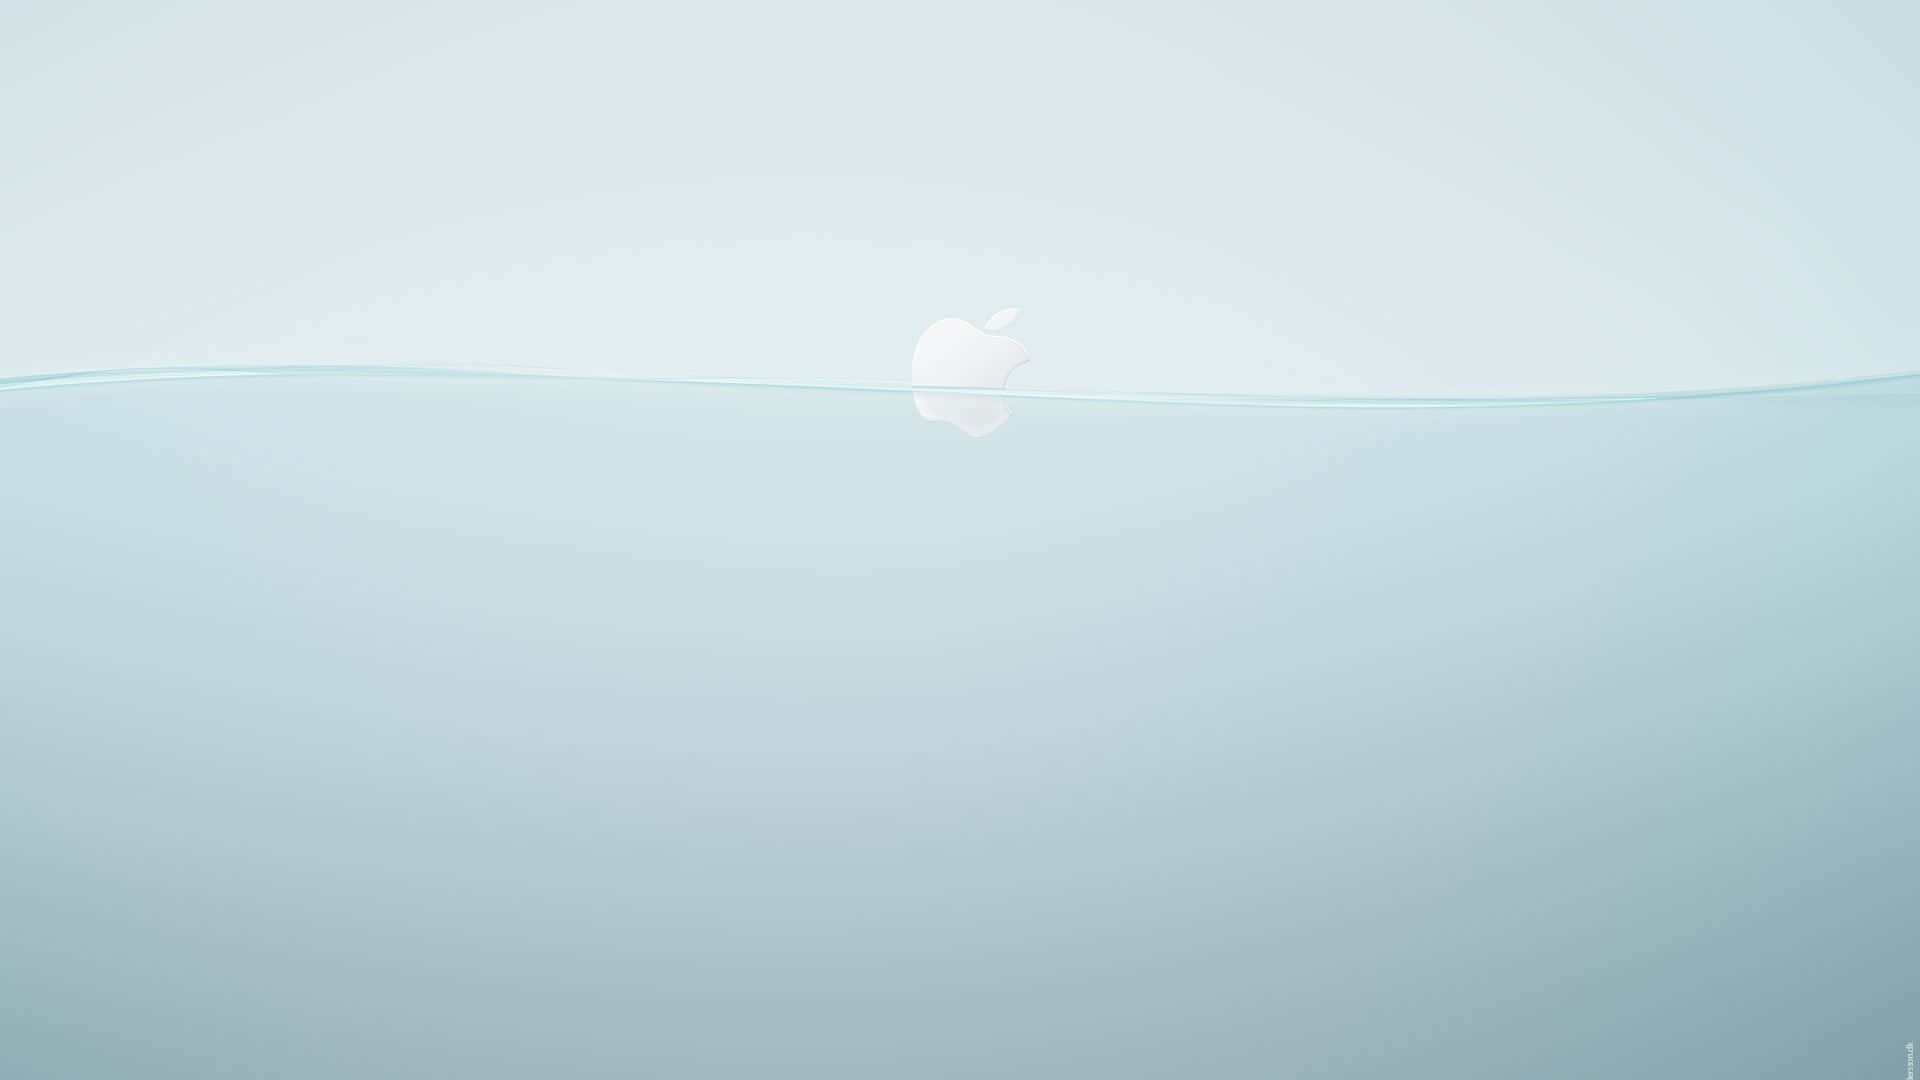 Apple Logo Floating In The Water